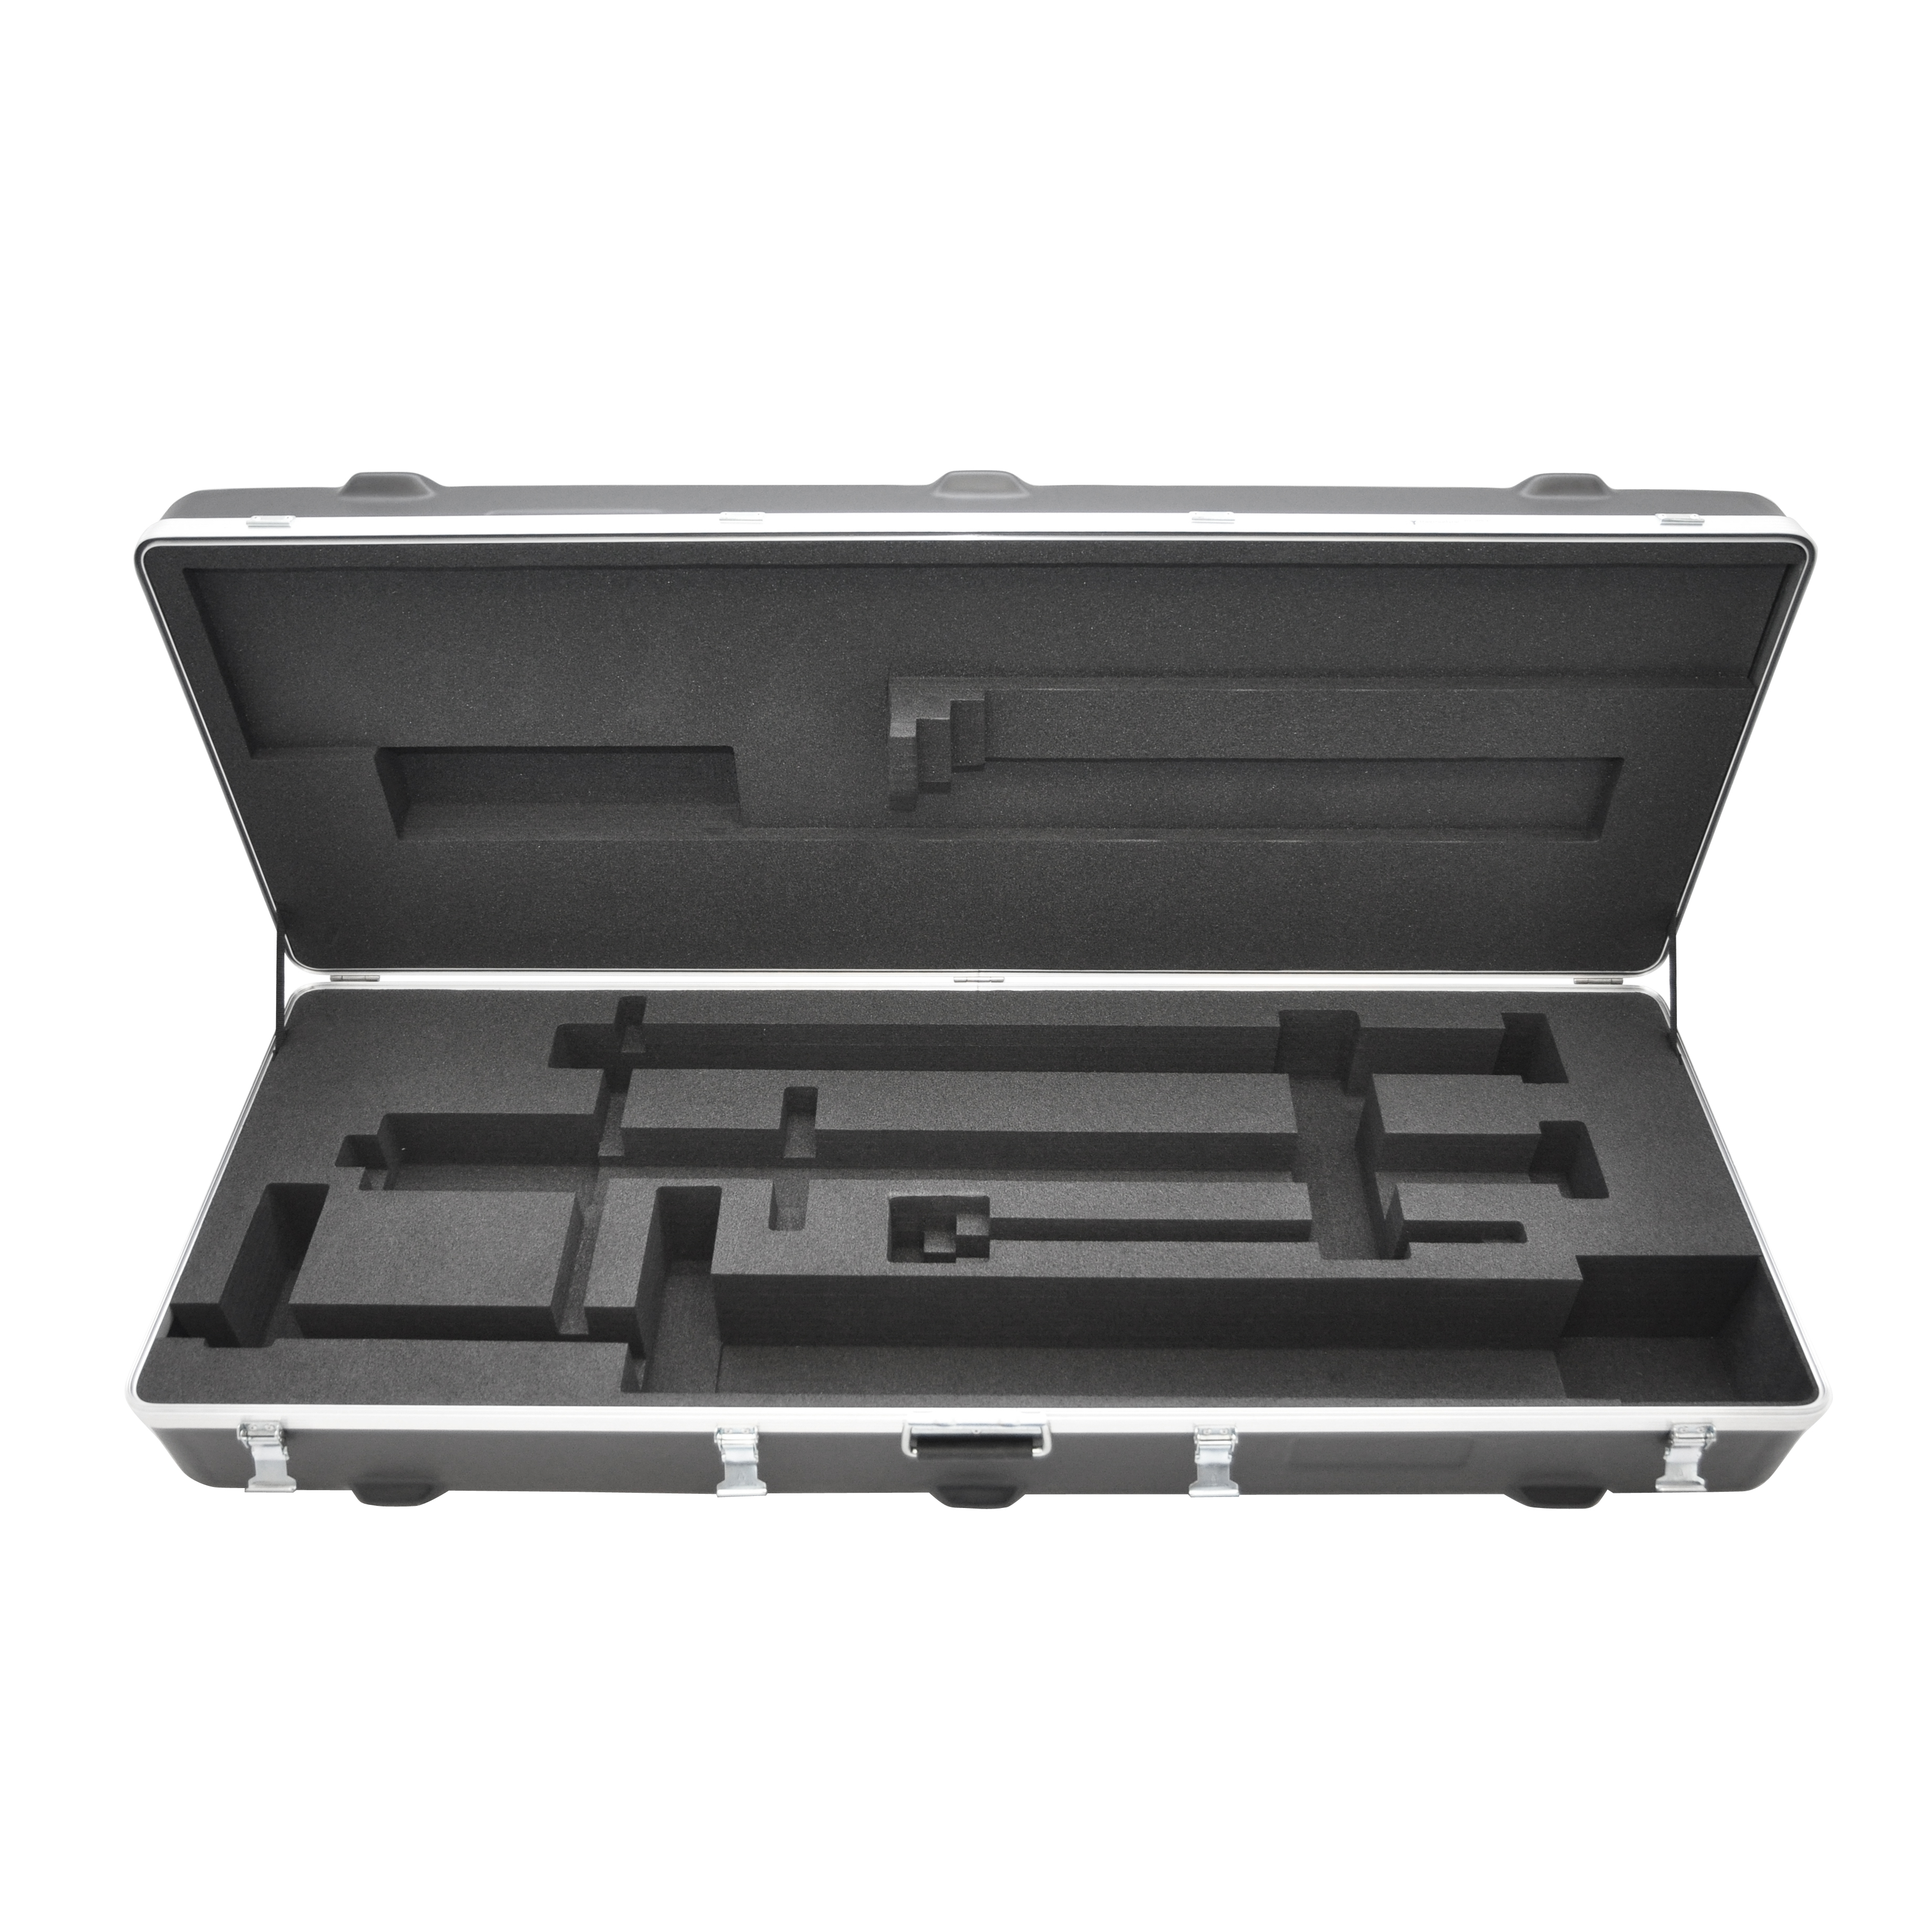 Carrying case for gas standpipe